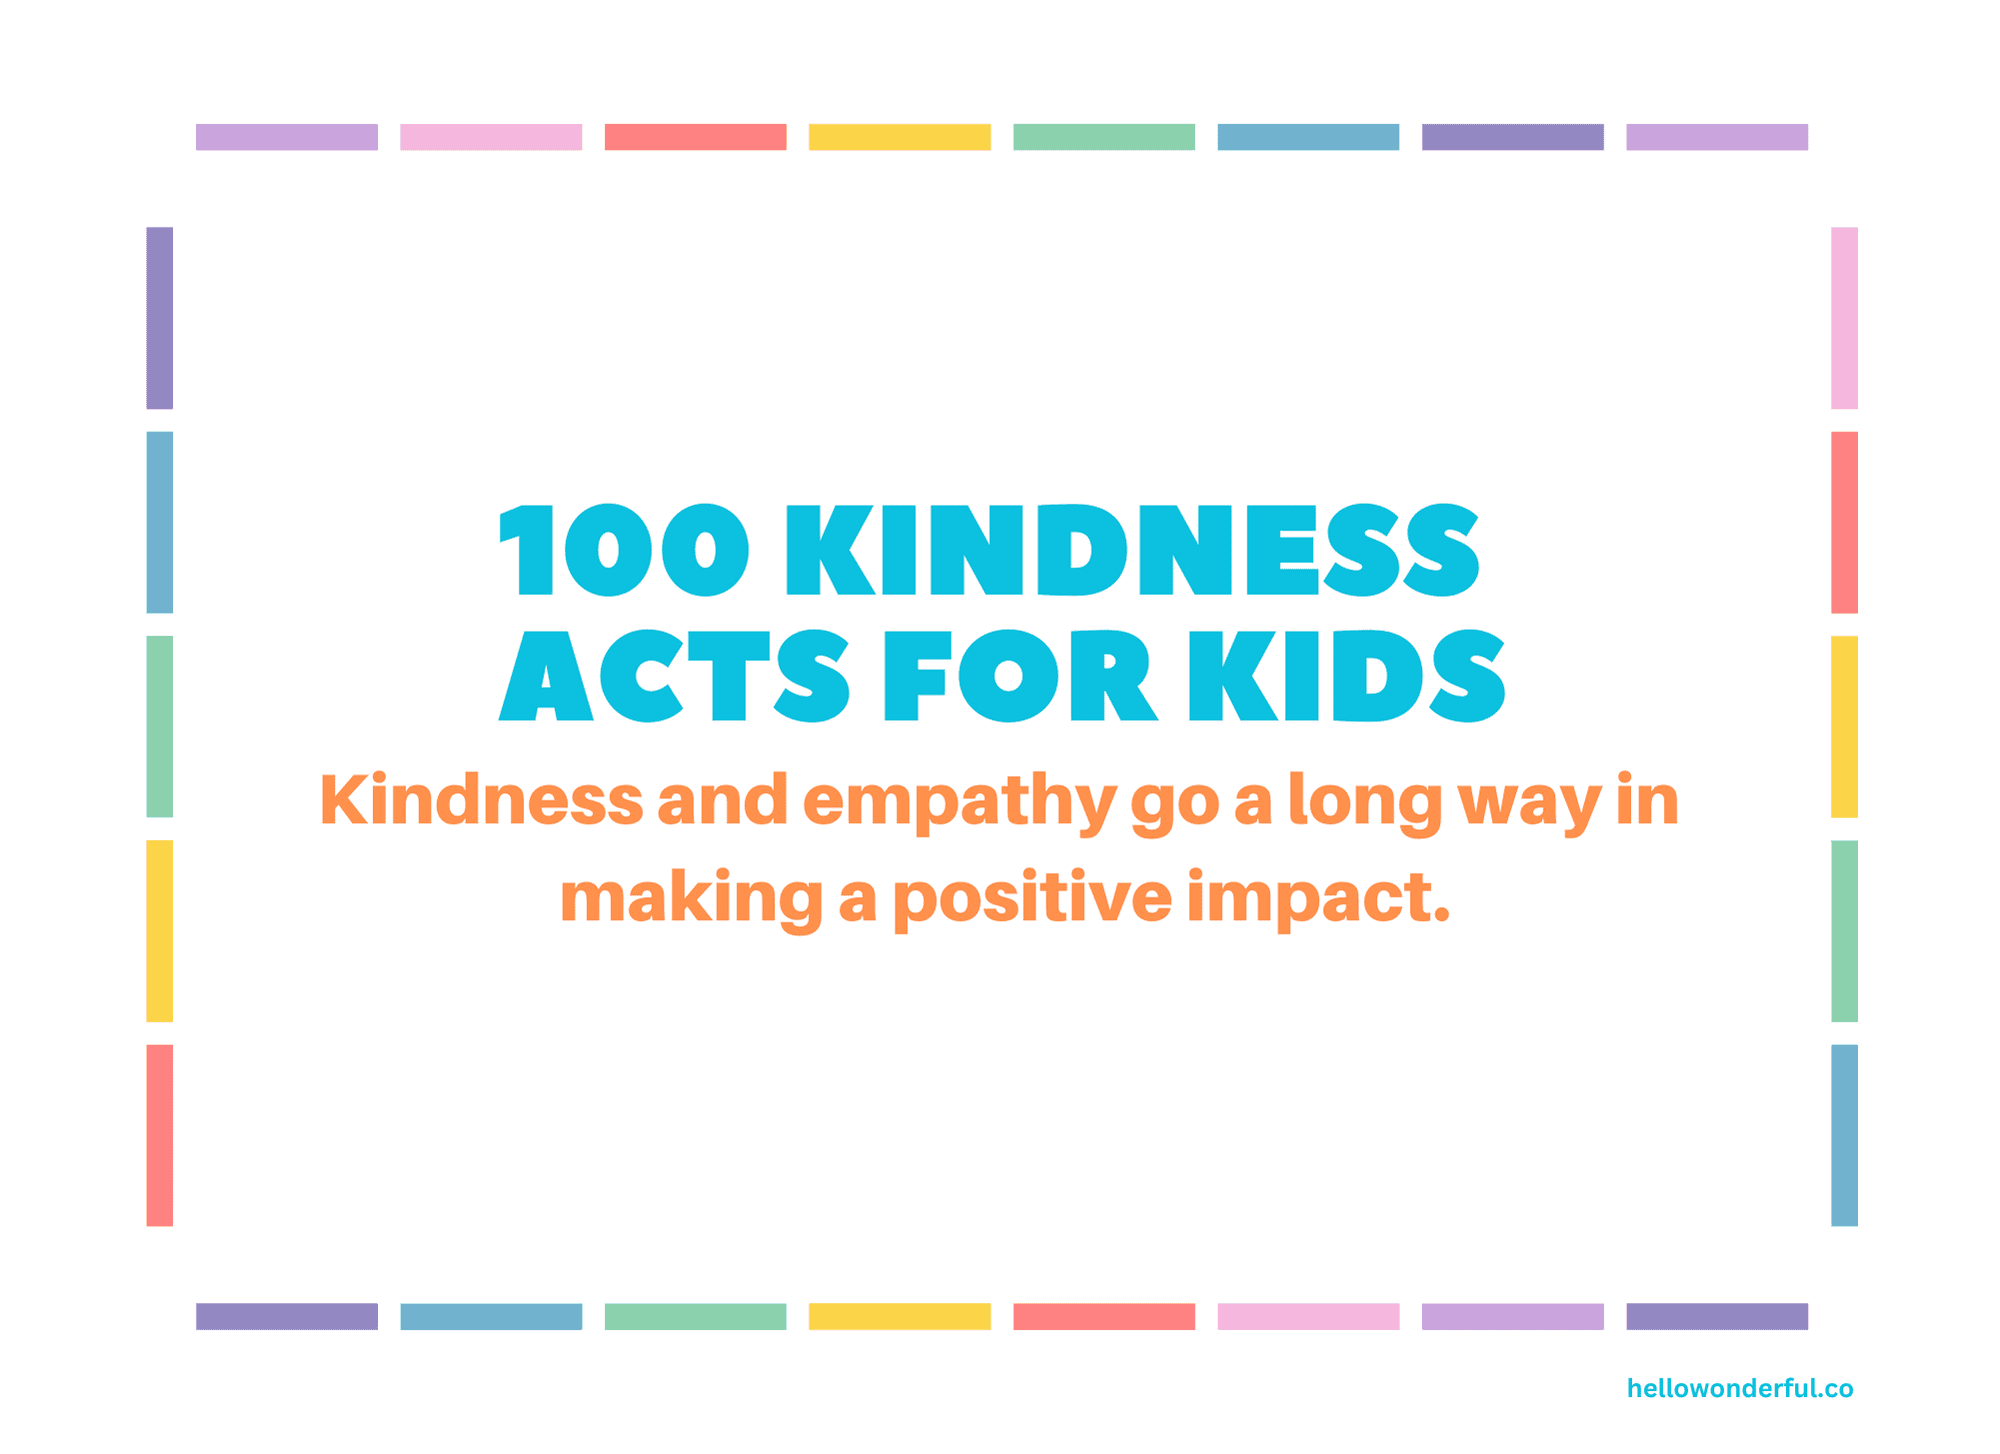 Kindness acts for kids